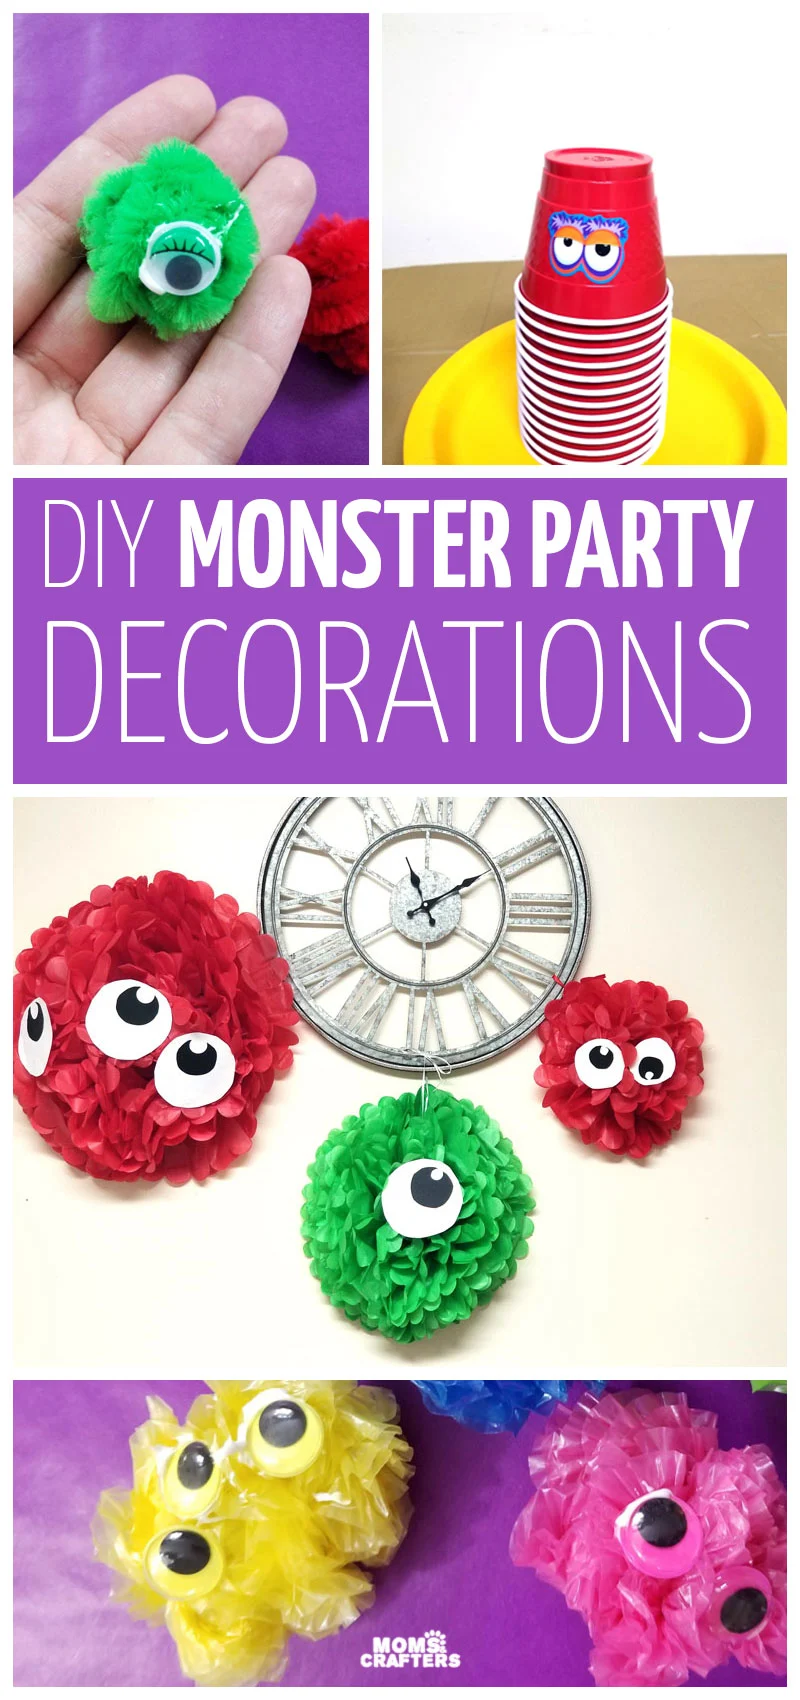 DIY monster party decorations that are easy to make - kids can help too! Such a fun theme for a three year old birthday party idea.